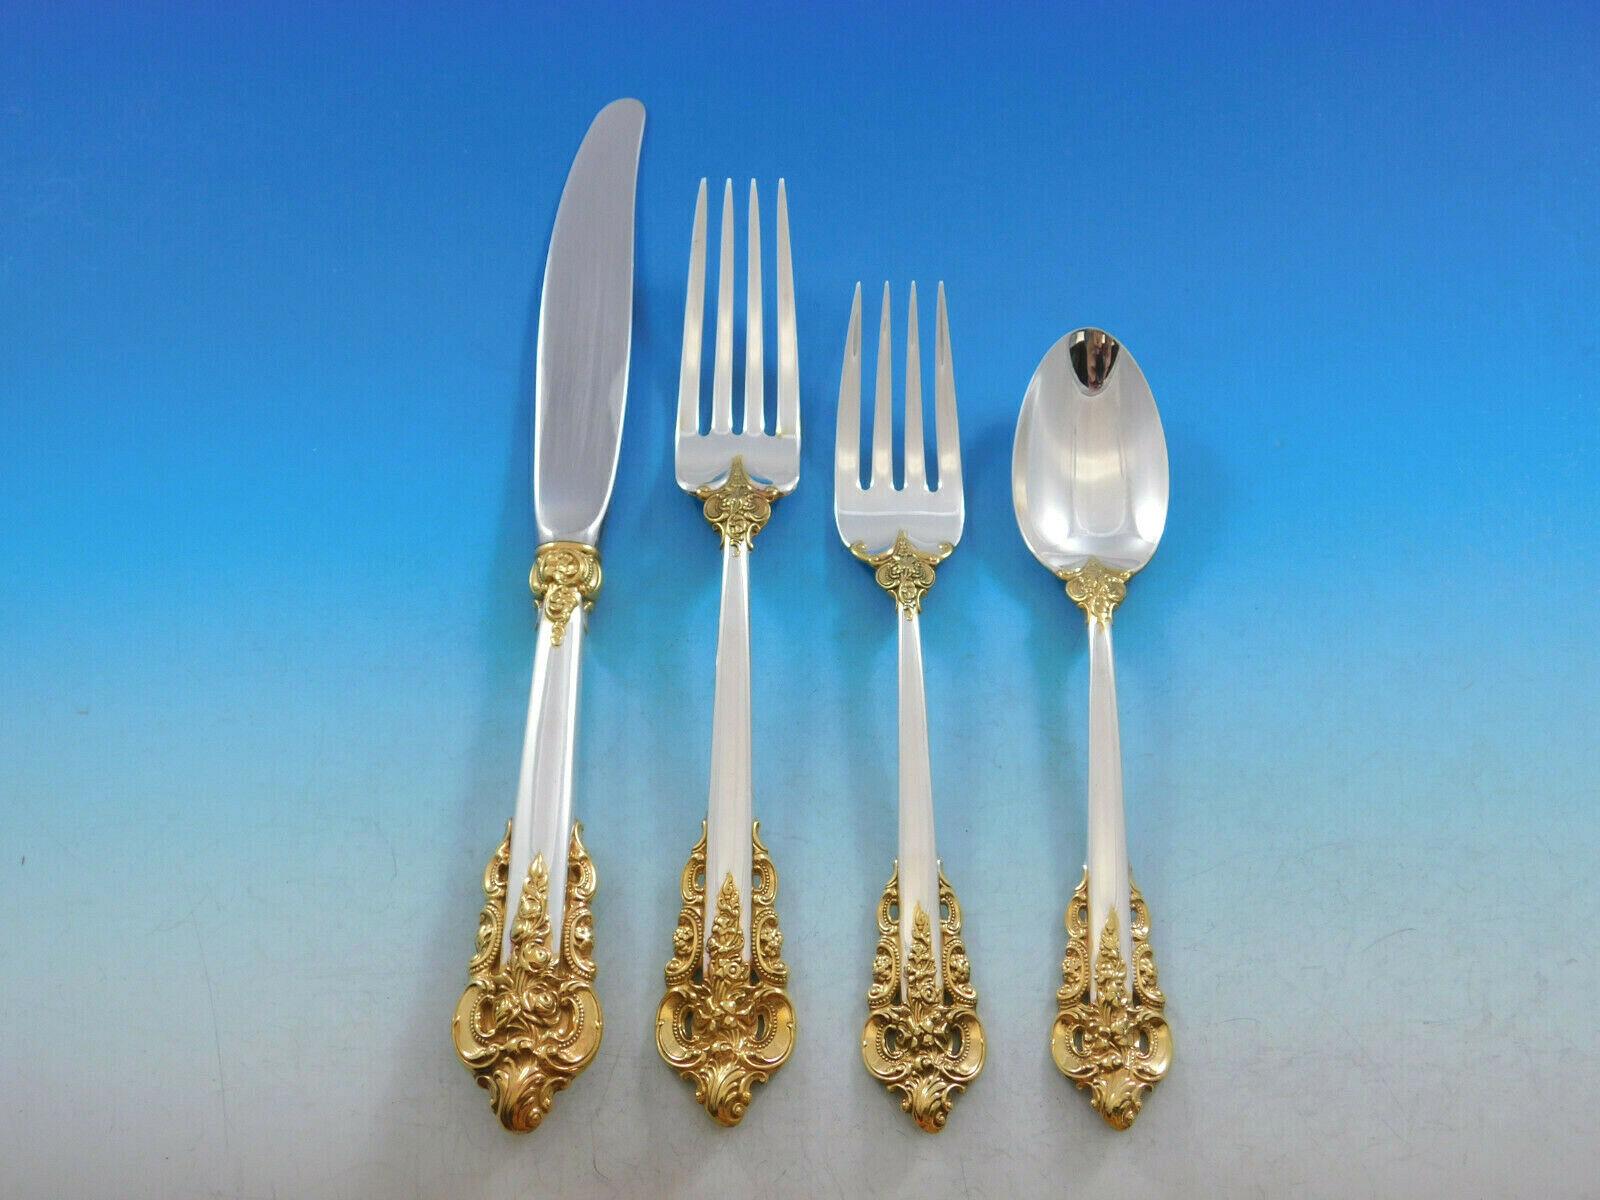 Gold accent Grande Baroque by Wallace sterling silver flatware set - 65 pieces. This set includes:

12 knives, 8 7/8